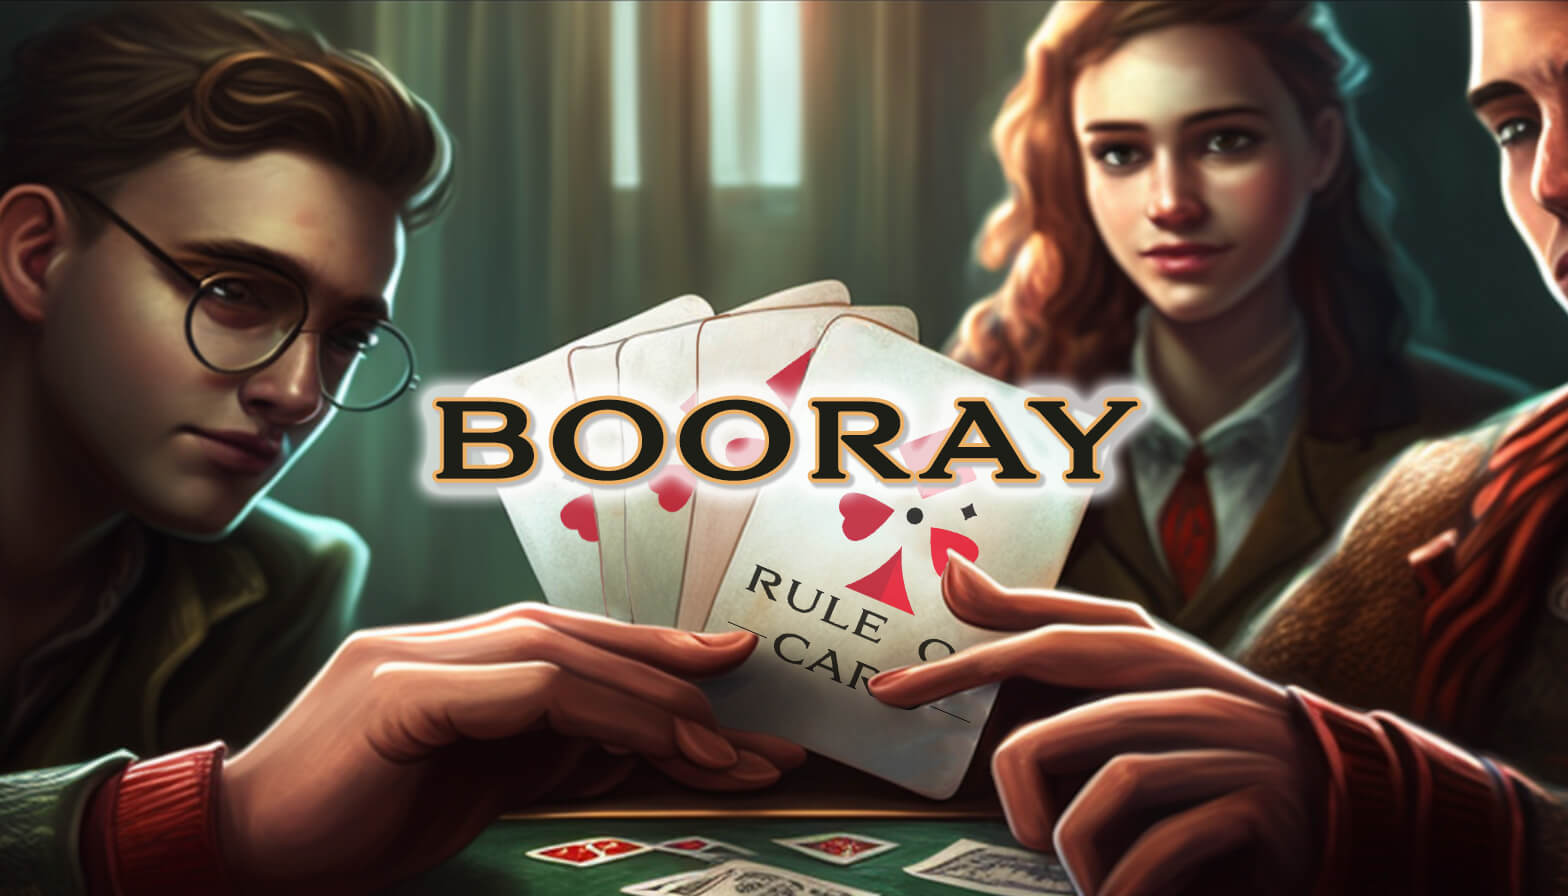 Playing the card game Booray